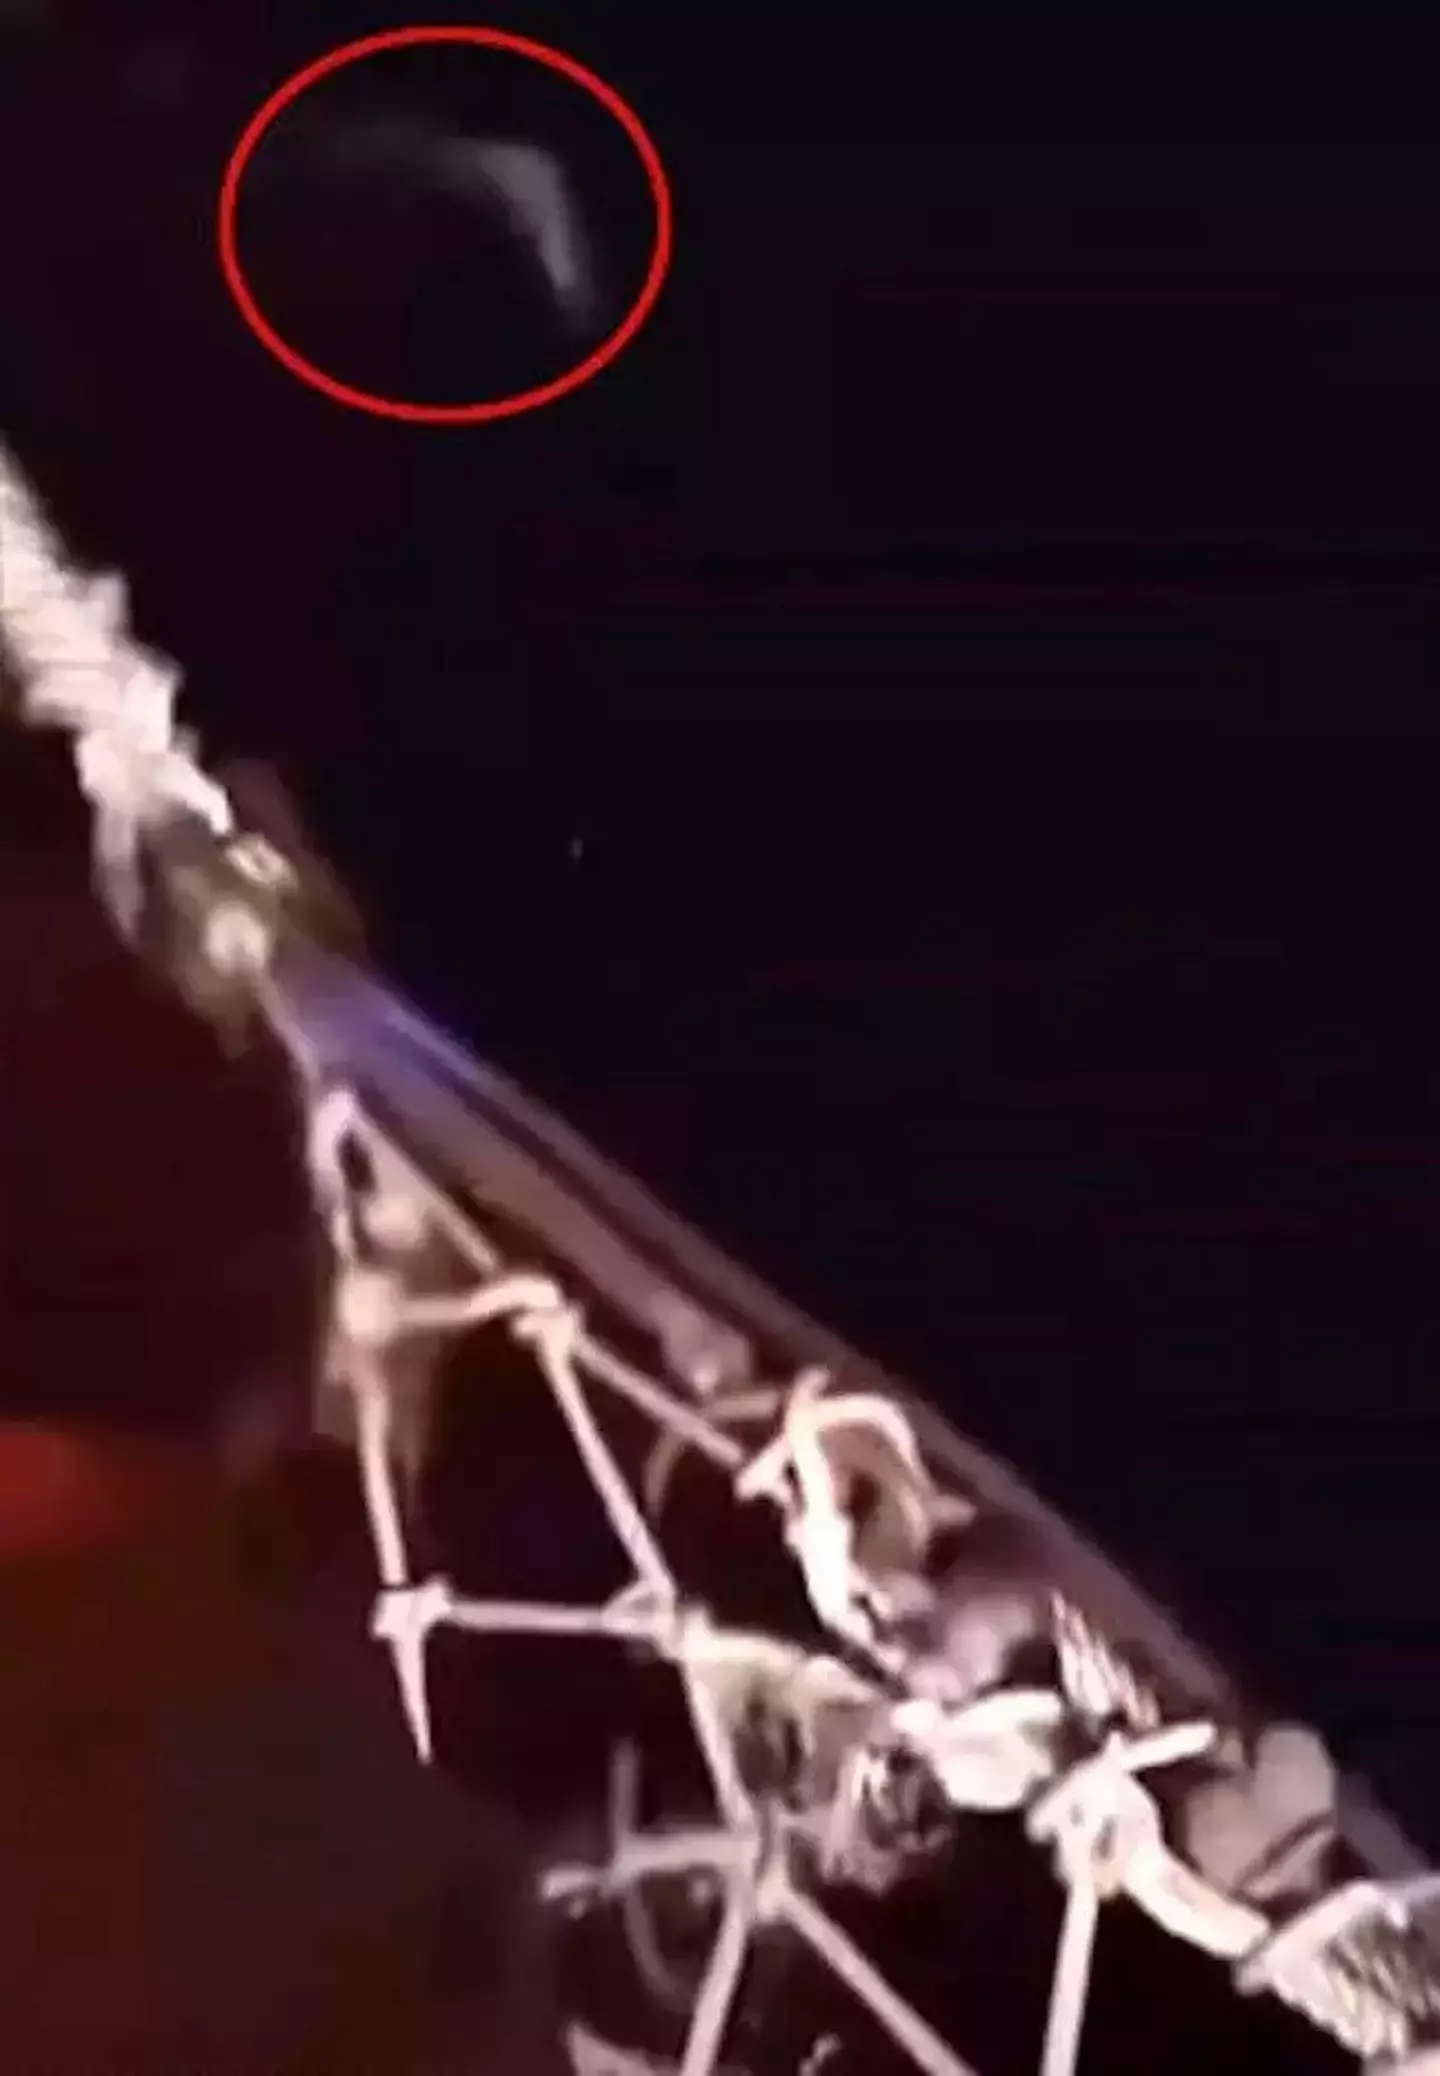 Viewers had thought the circled image is of a 'shark'.